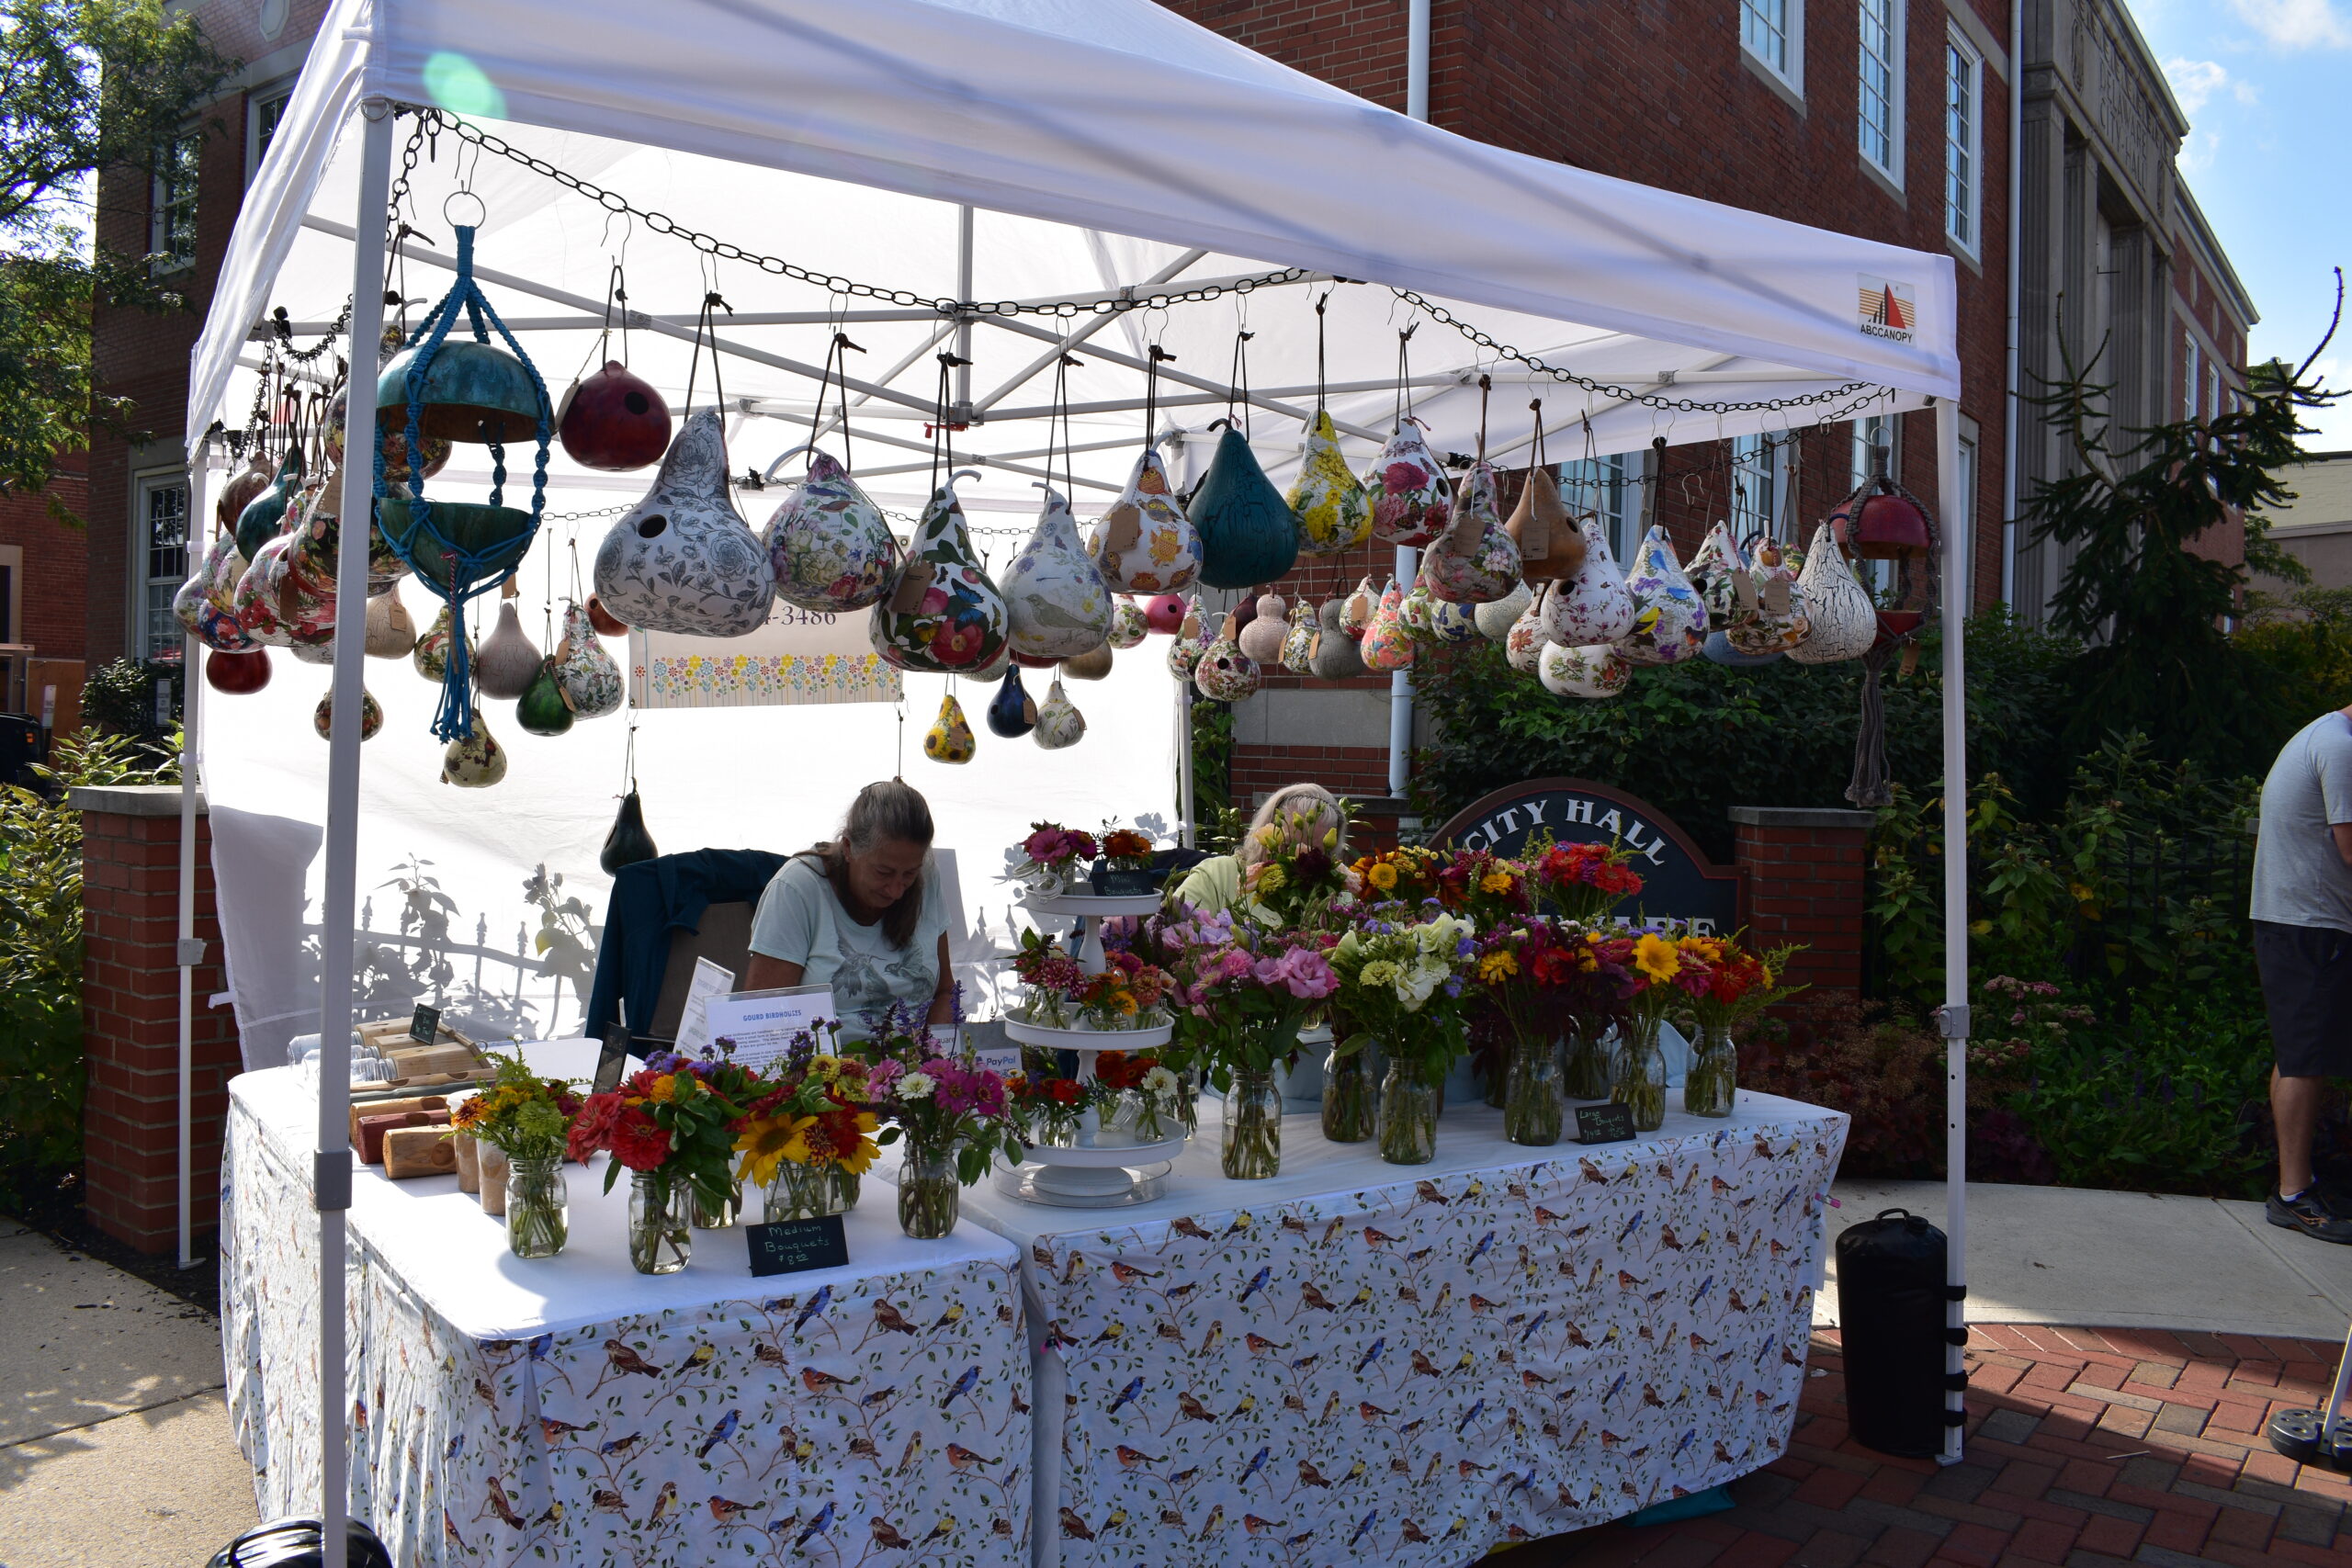 A florists display at the farmers market.